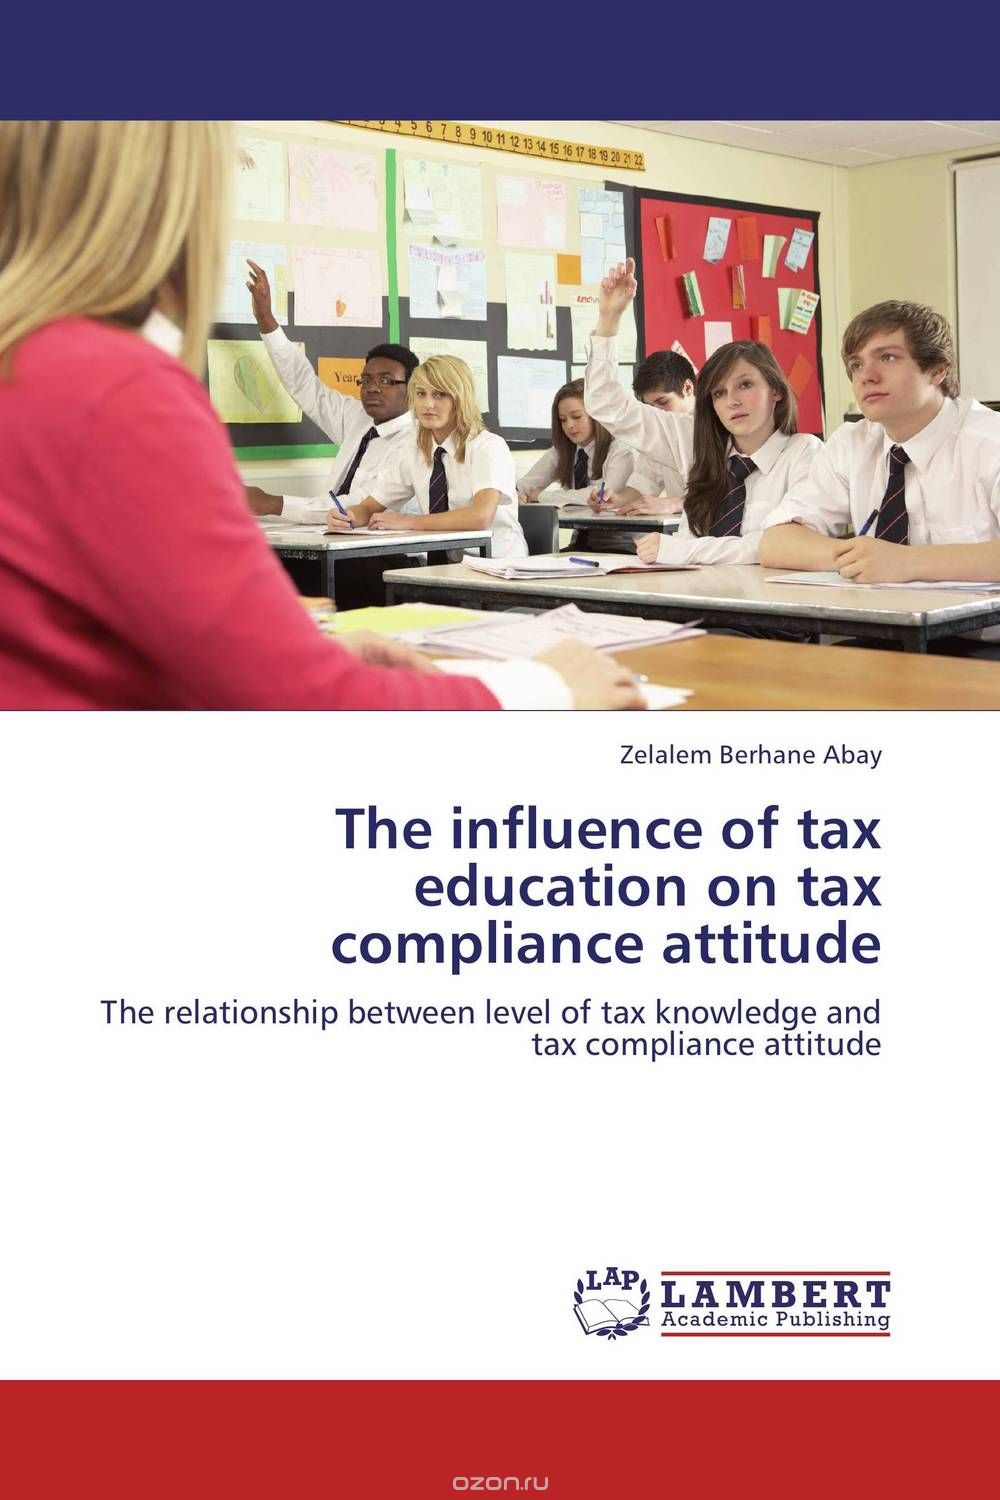 The influence of tax education on tax compliance attitude